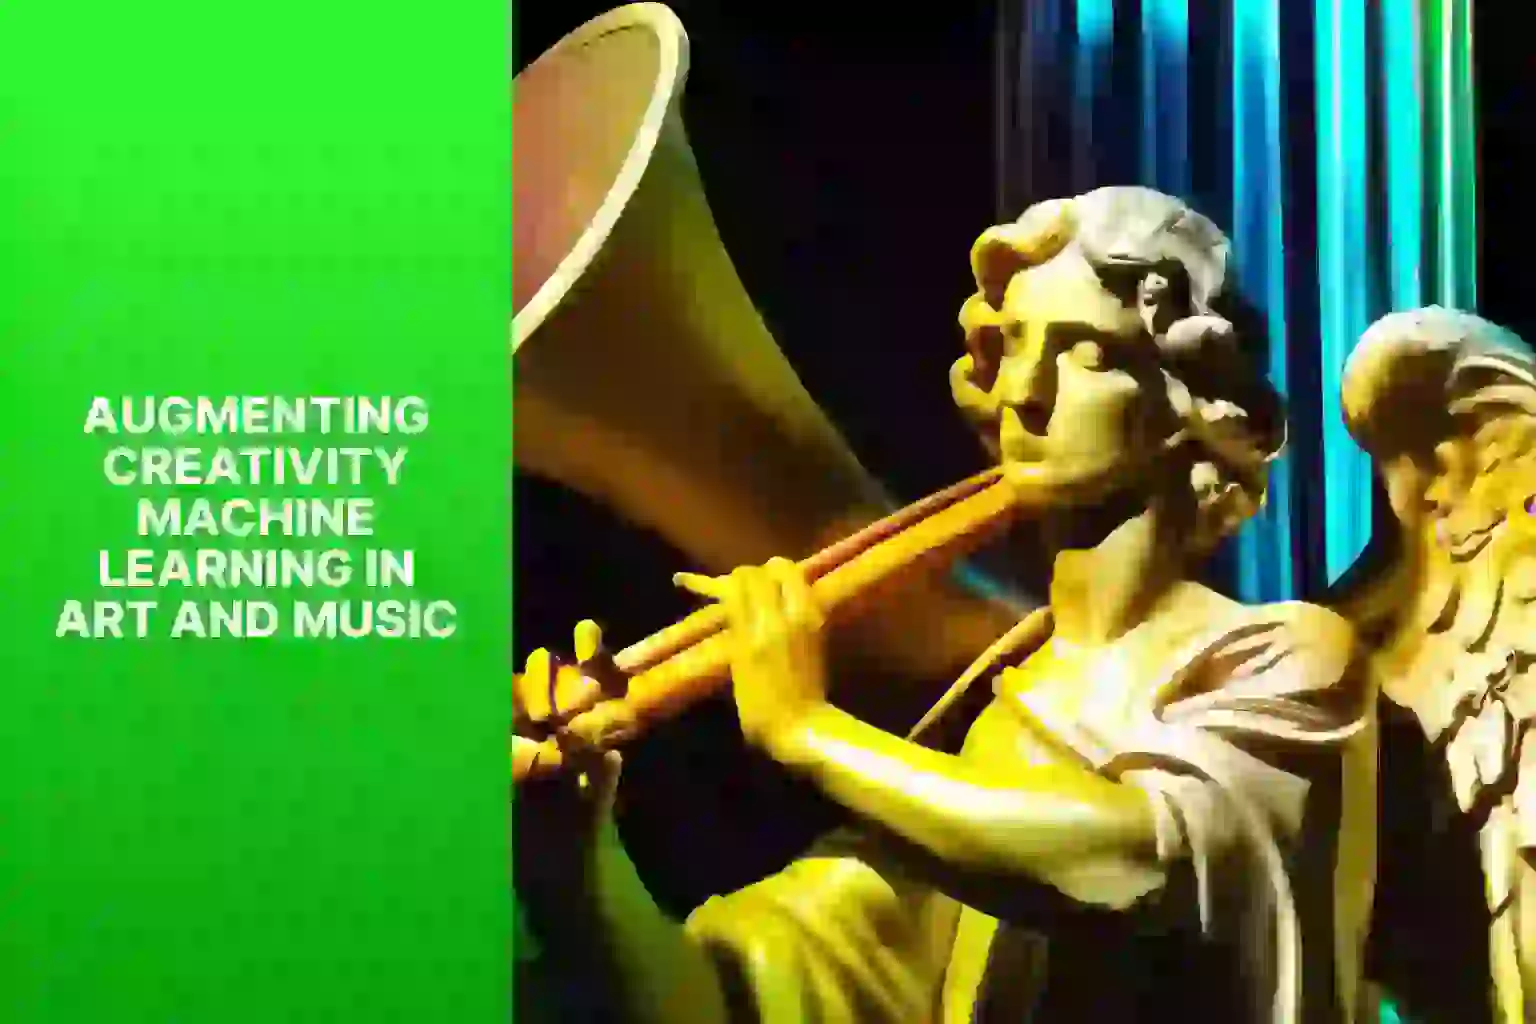 Augmenting Creativity Machine Learning in Art and Music